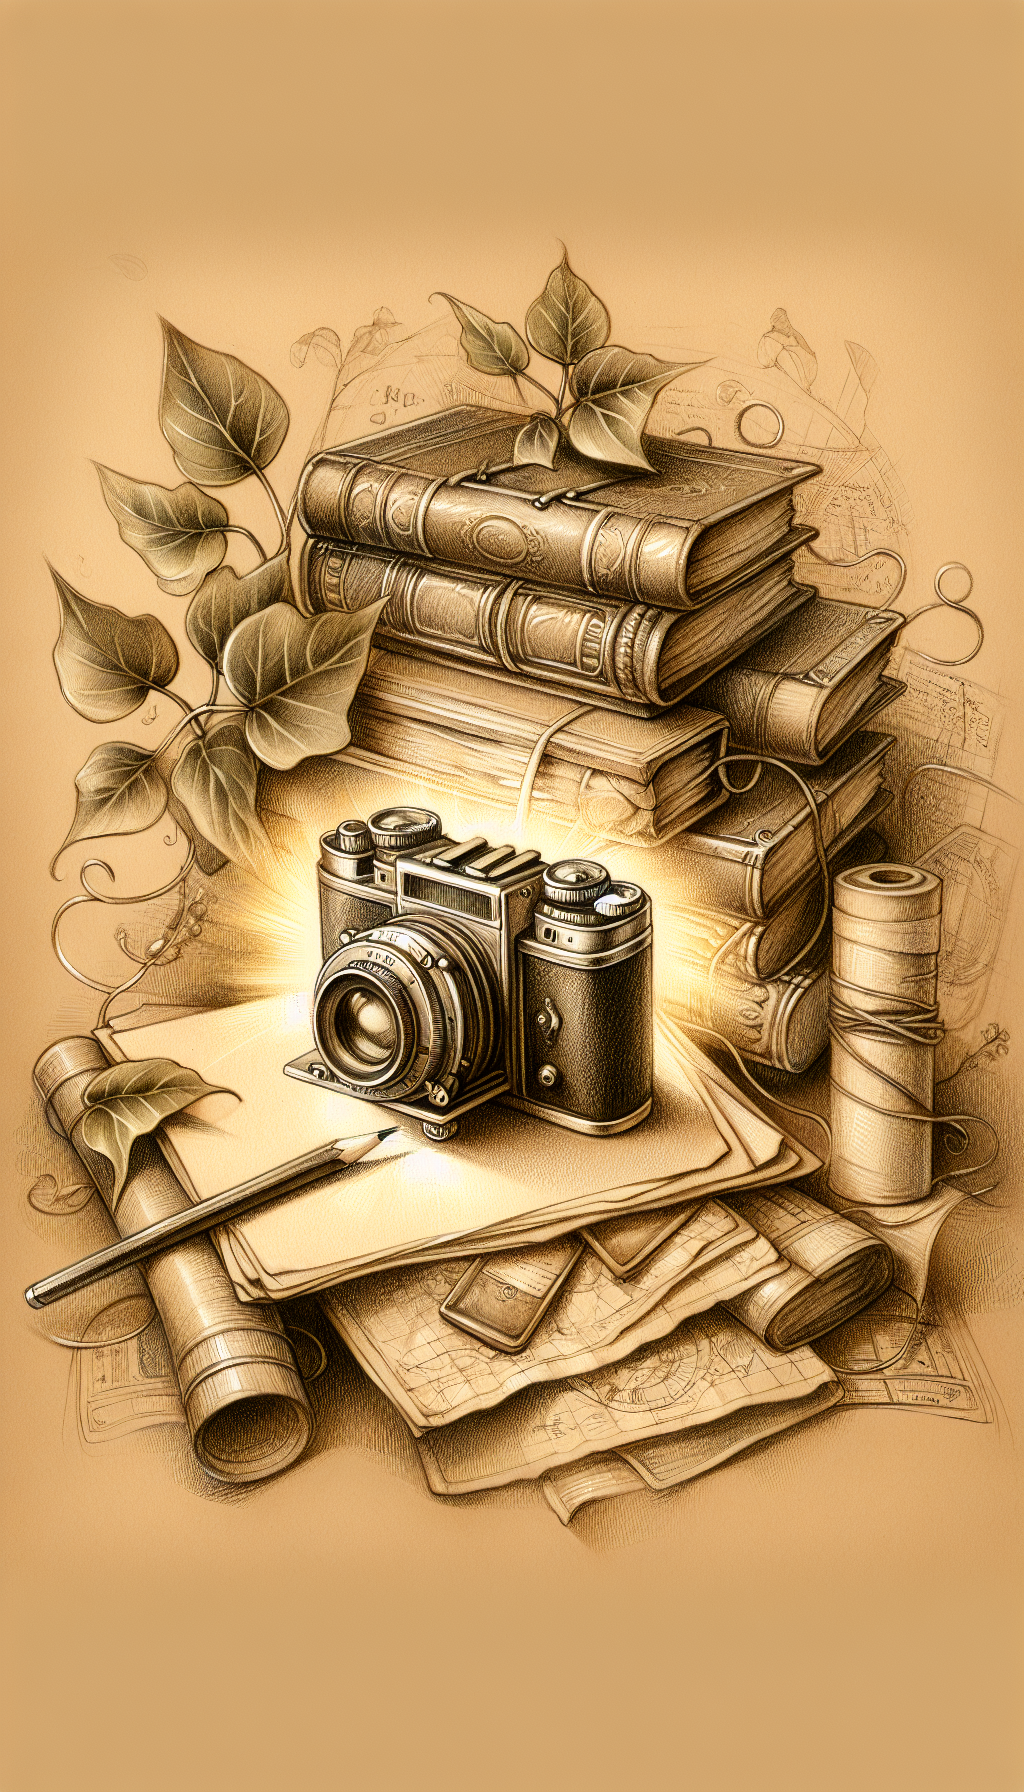 An intricate, sepia-toned pencil sketch with occasional watercolor accents illustrates an antique camera perched atop a stack of timeworn journals and maps. Delicate lines trace its silhouette, while a golden, shimmering aura radiates from it, symbolizing its value. Entwined ivy leaves, representing the passage of time, frame the camera, with a faded provenance certificate nestled discreetly behind.